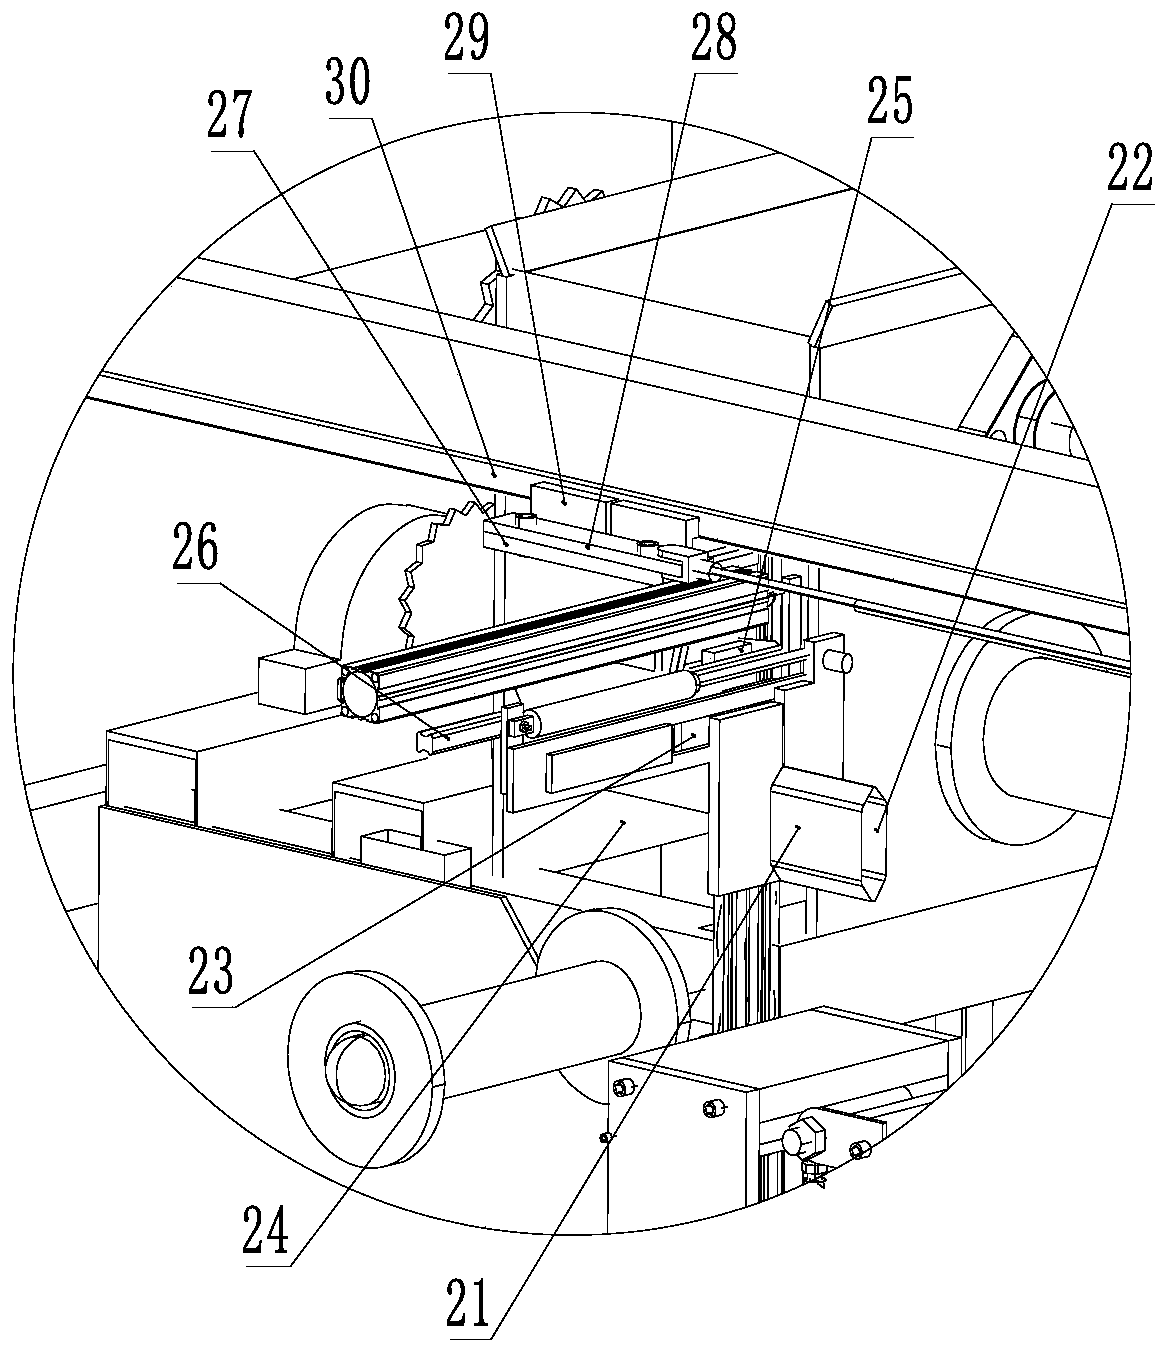 Fungus stick sleeving device and process